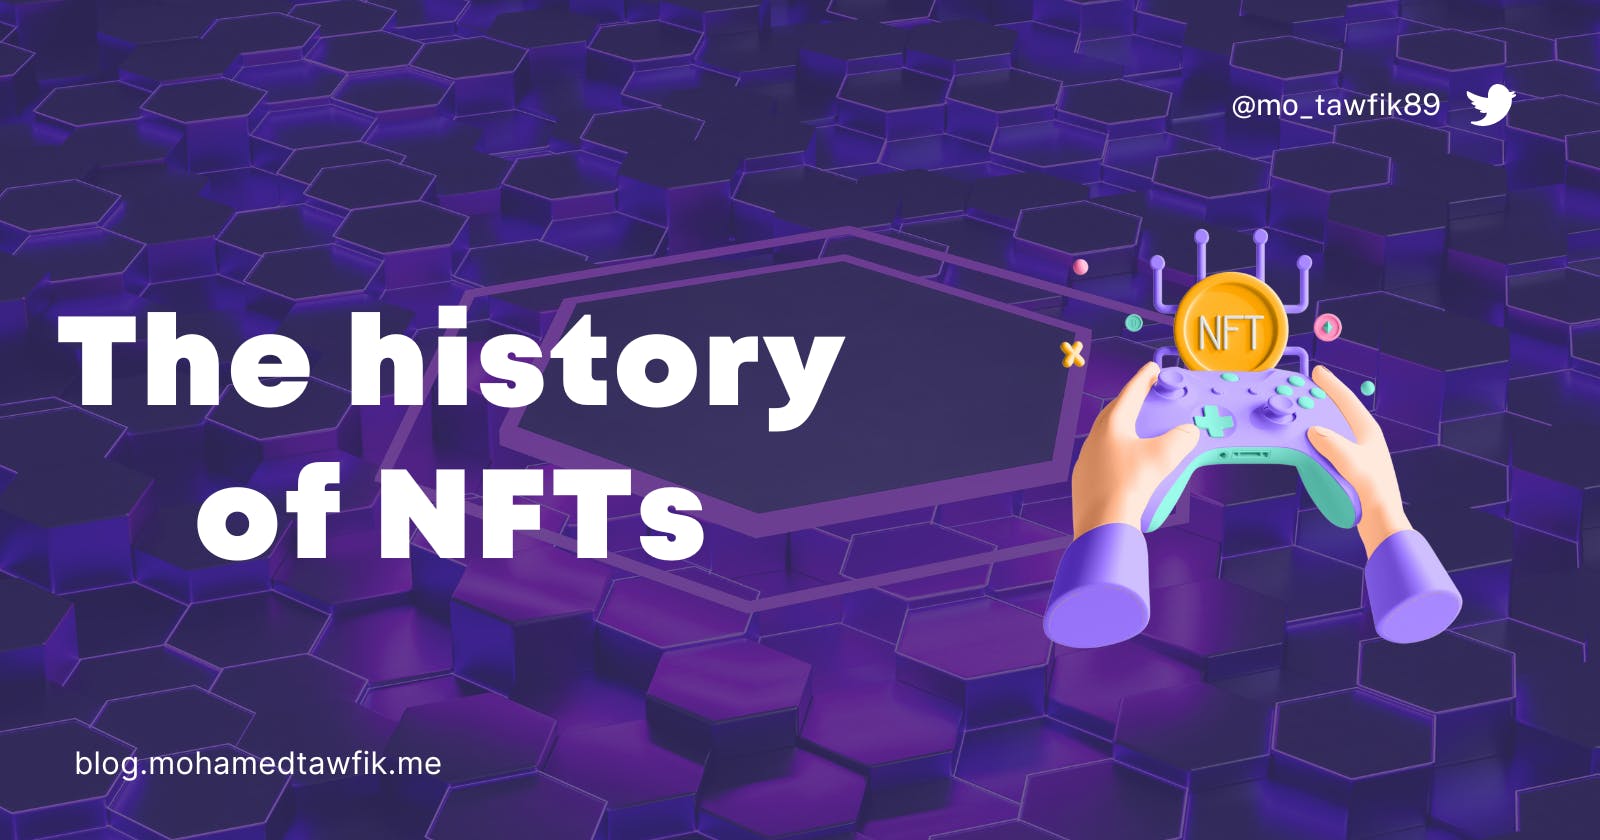 The history of NFTs